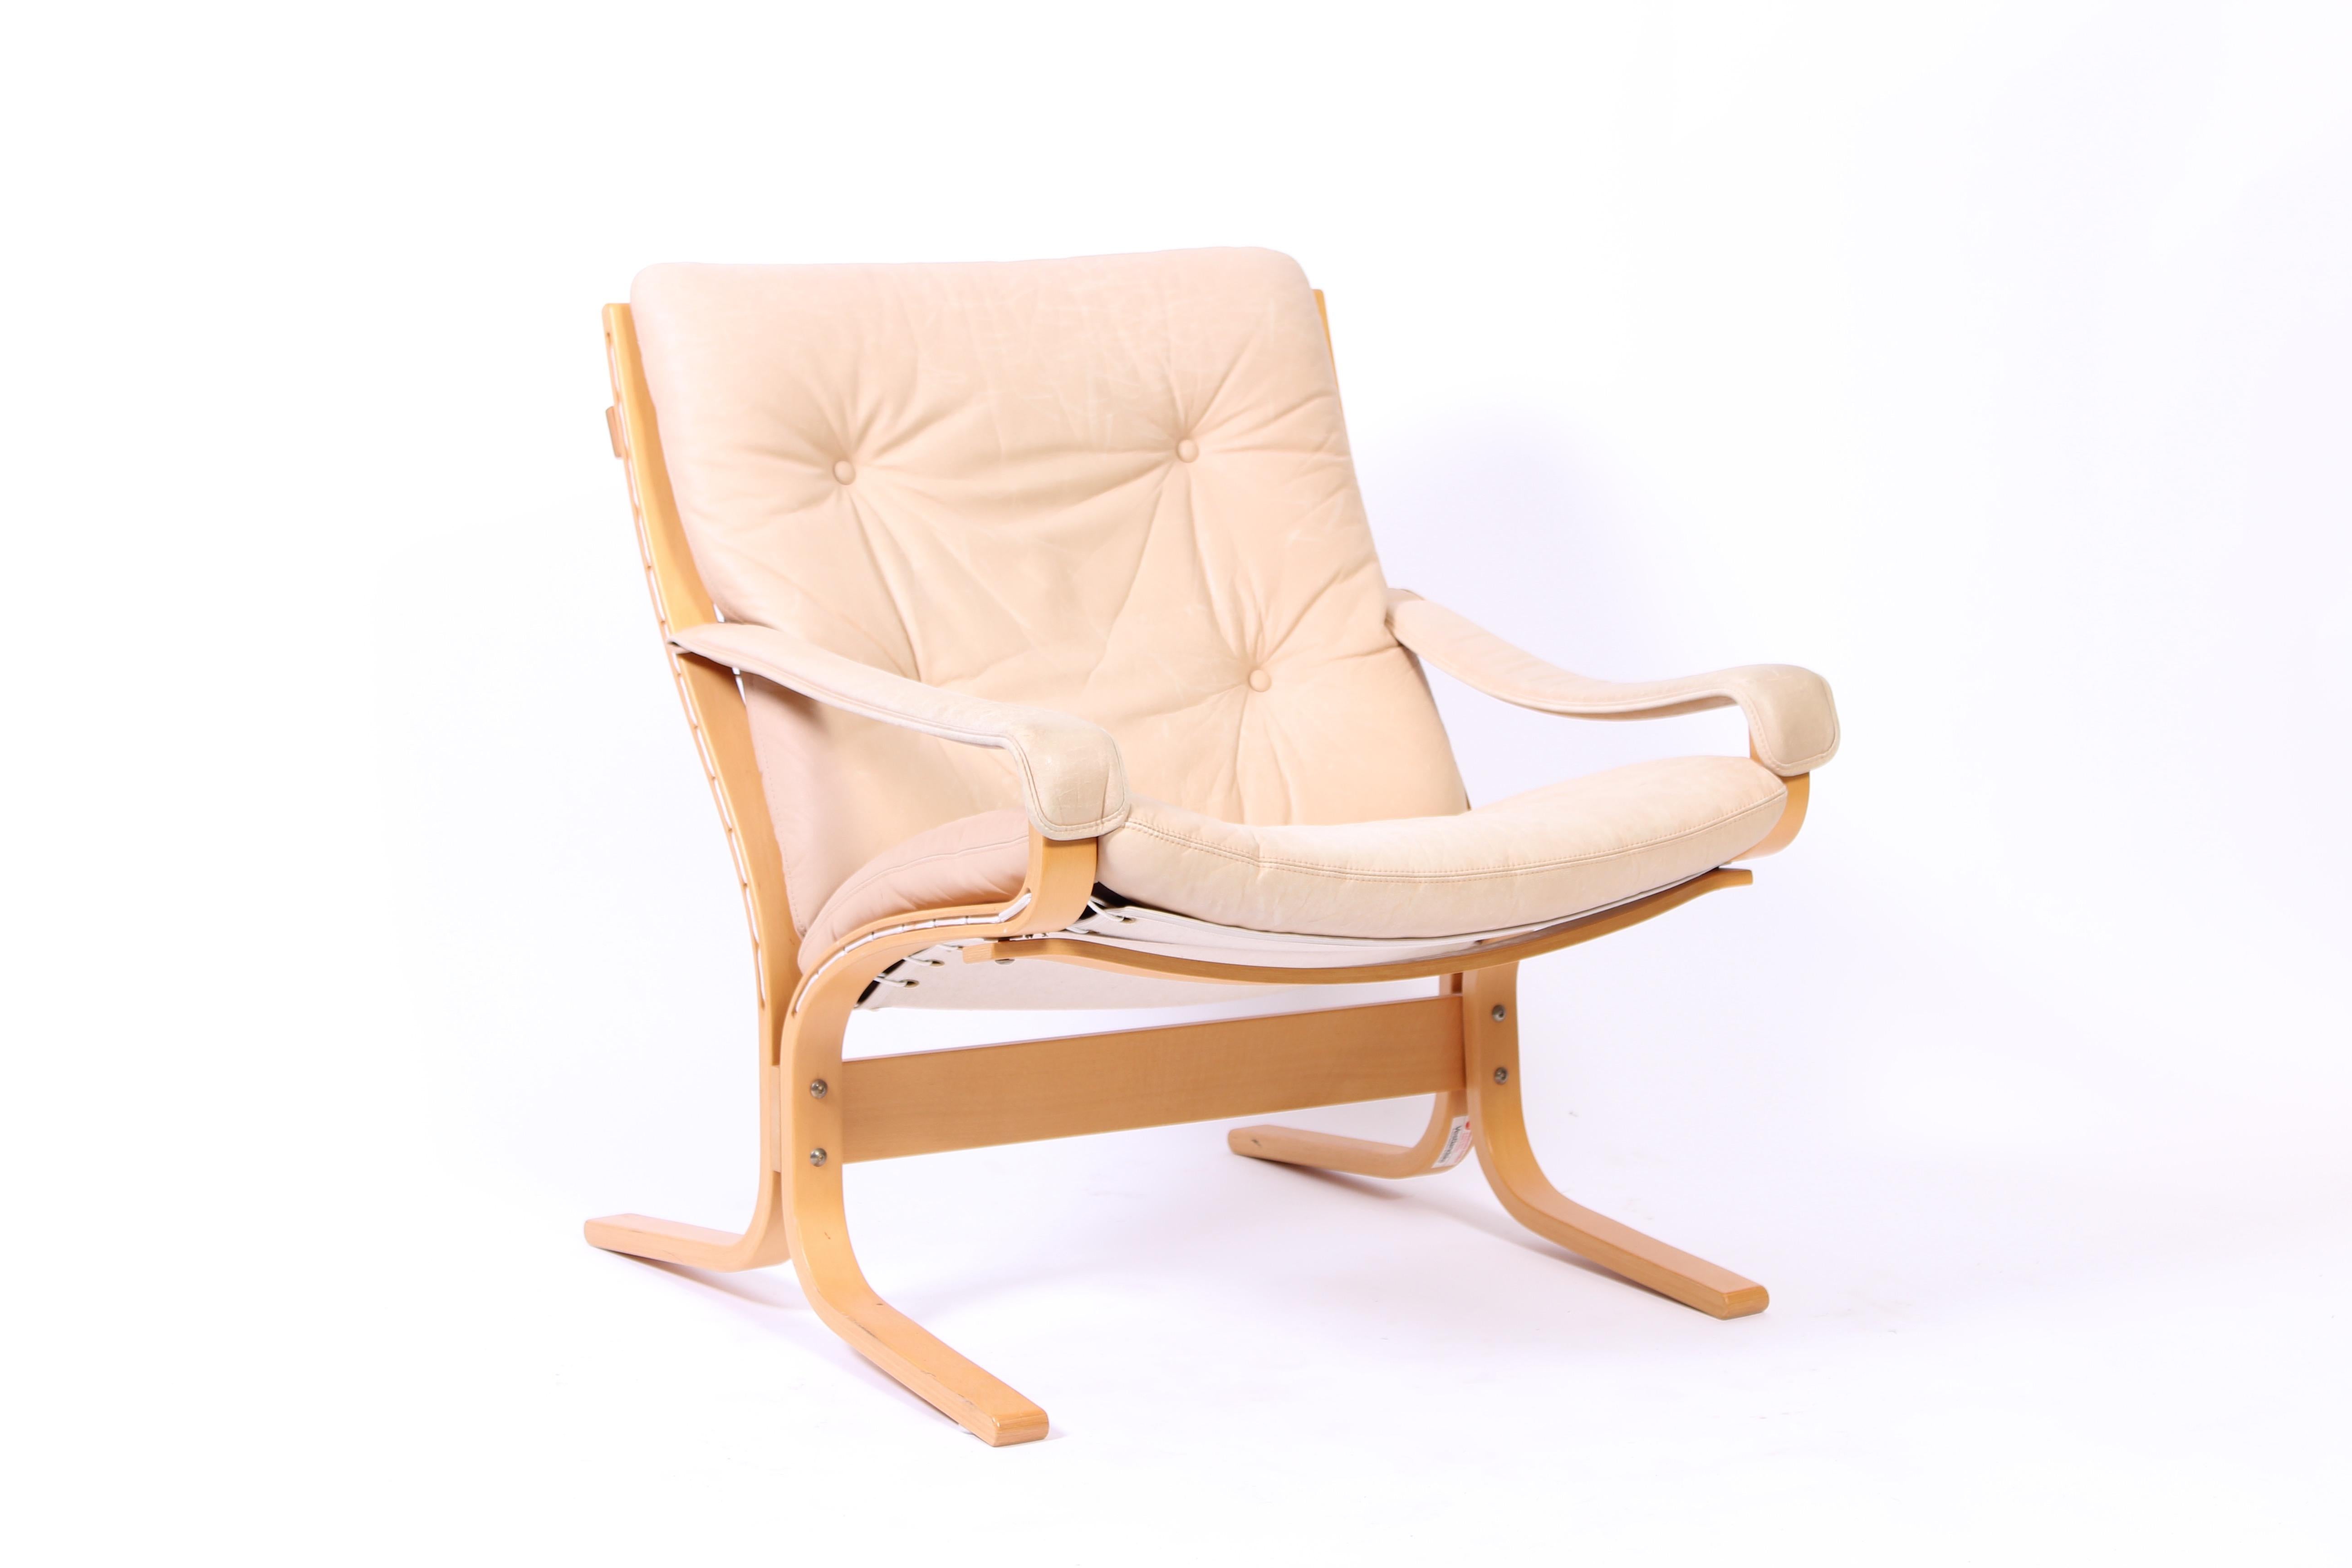 A vintage easy chair designed by Norwegian designer Ingmar Relling in the 1960s. The chair has a bentwood frame and original leather upholstery. Very good vintage condition with signs of usage and patina consistent with age.